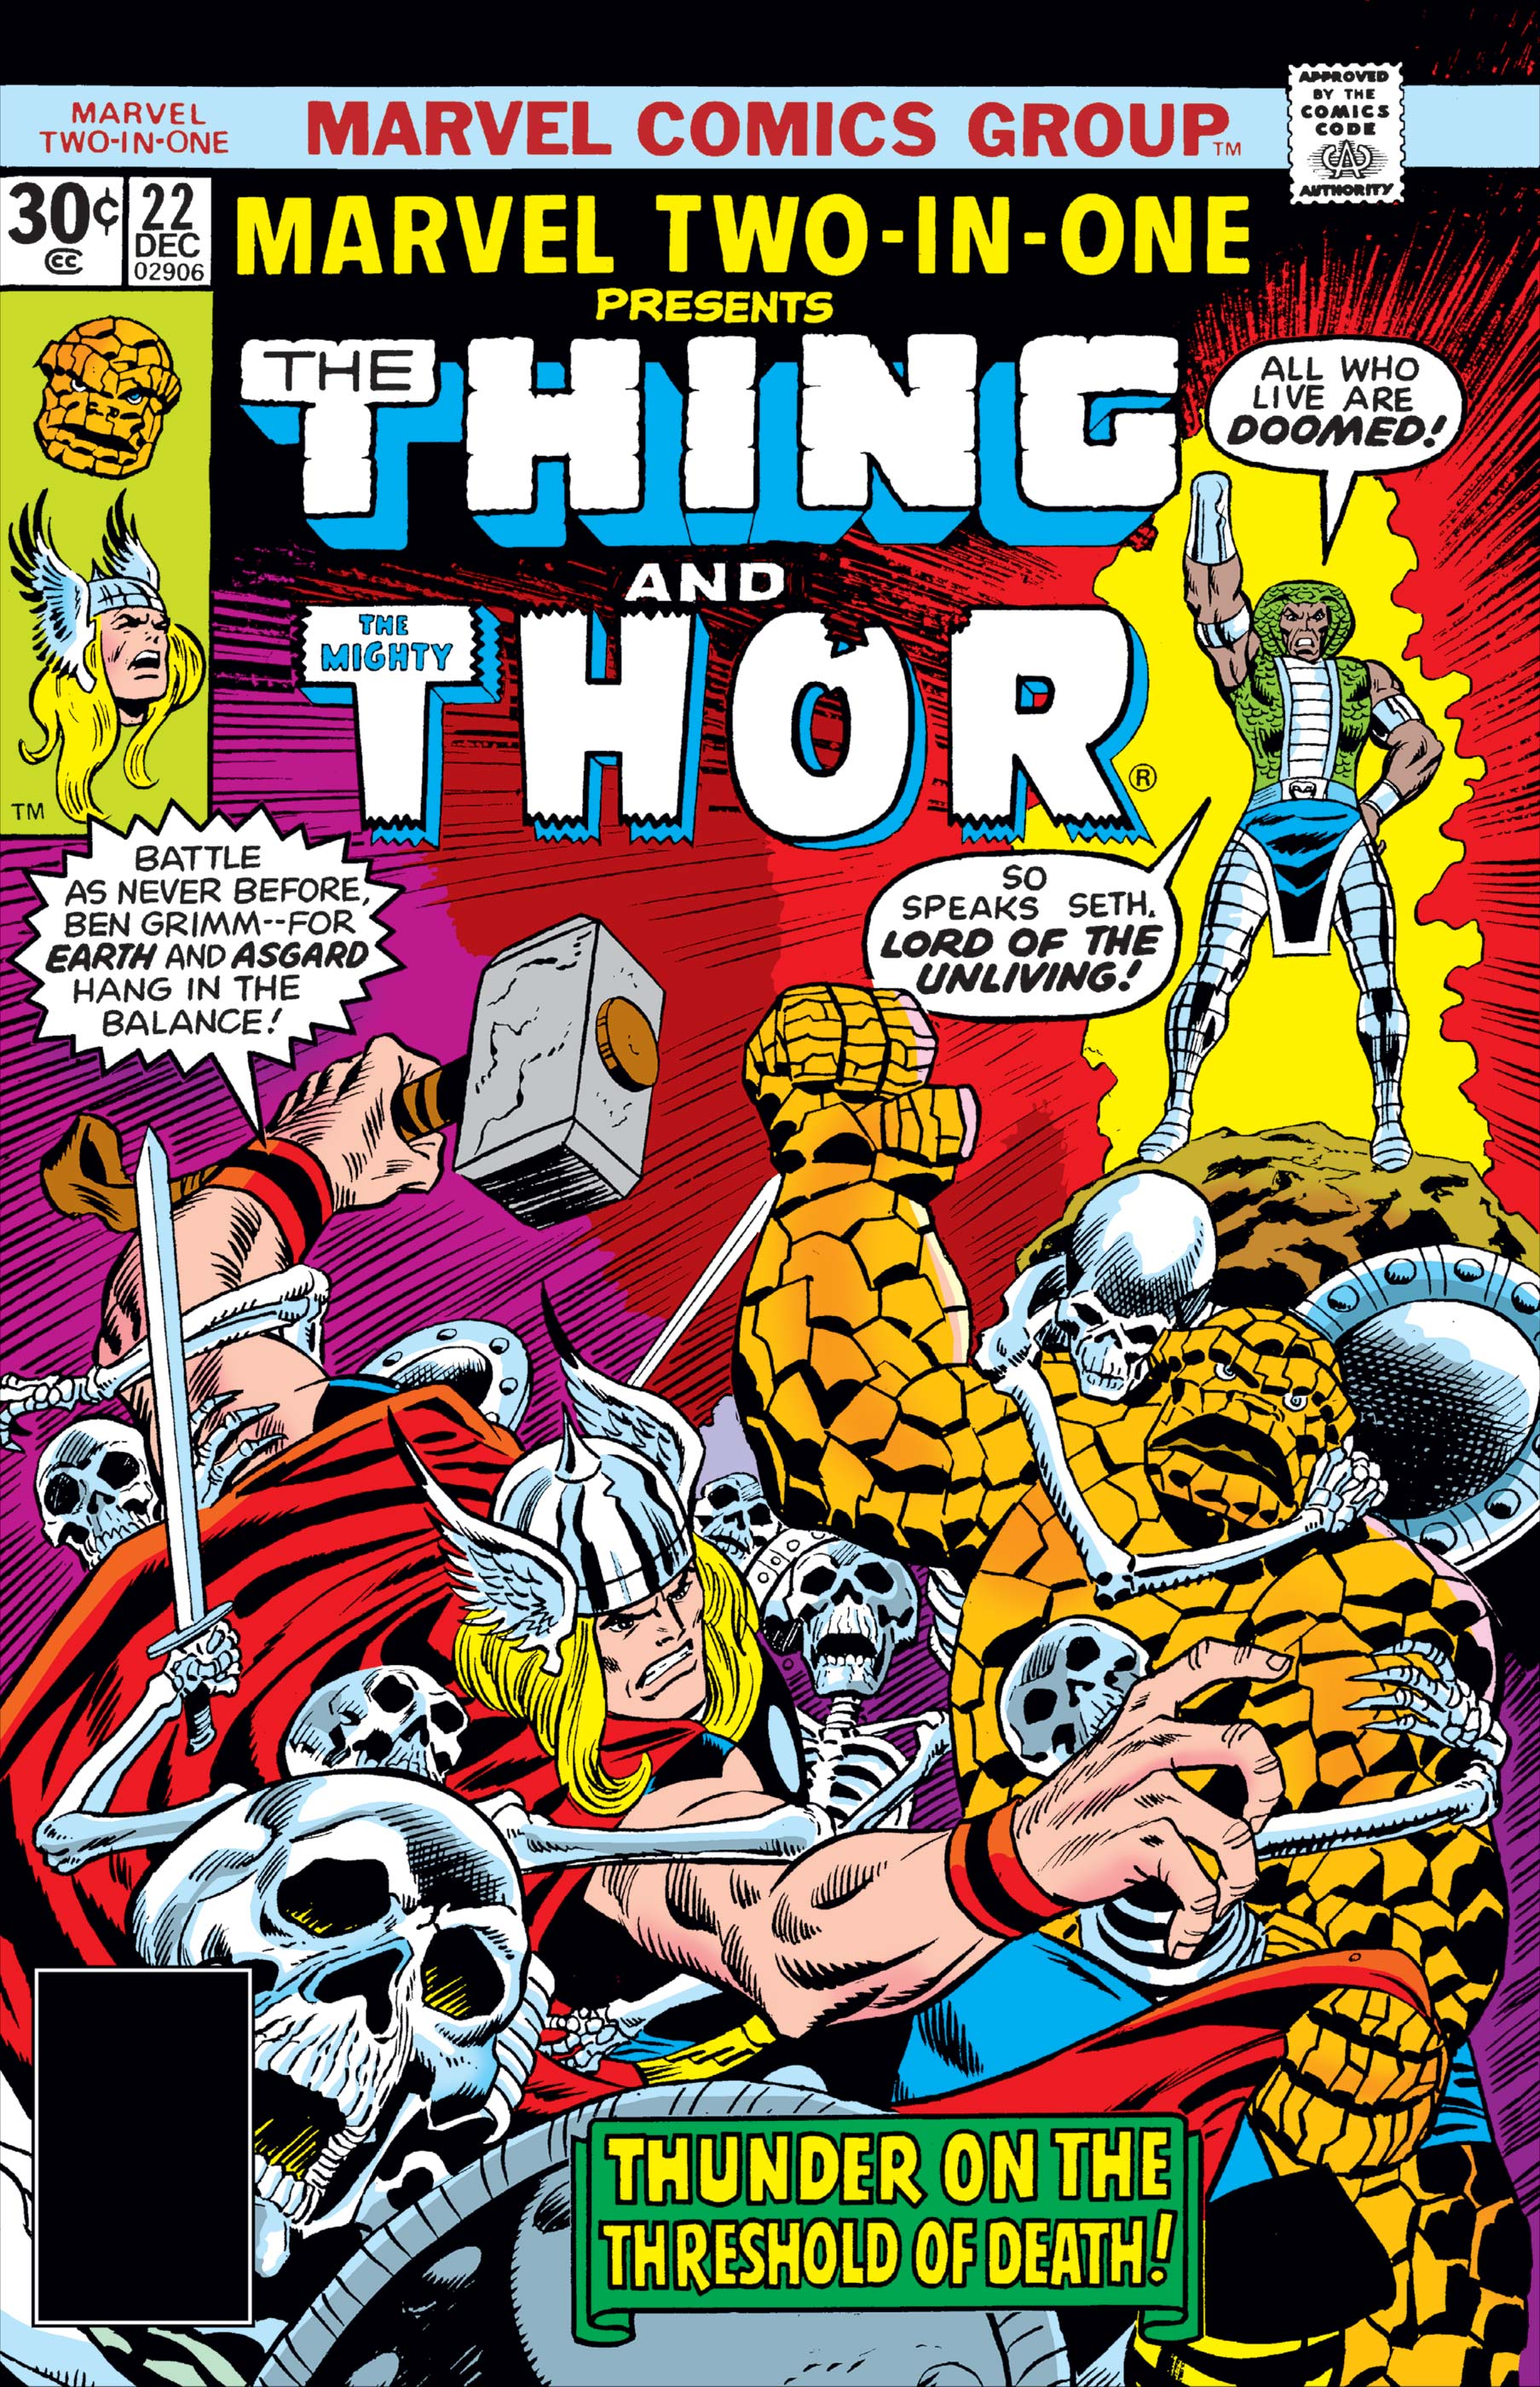 Marvel Two-in-One (1974) #22